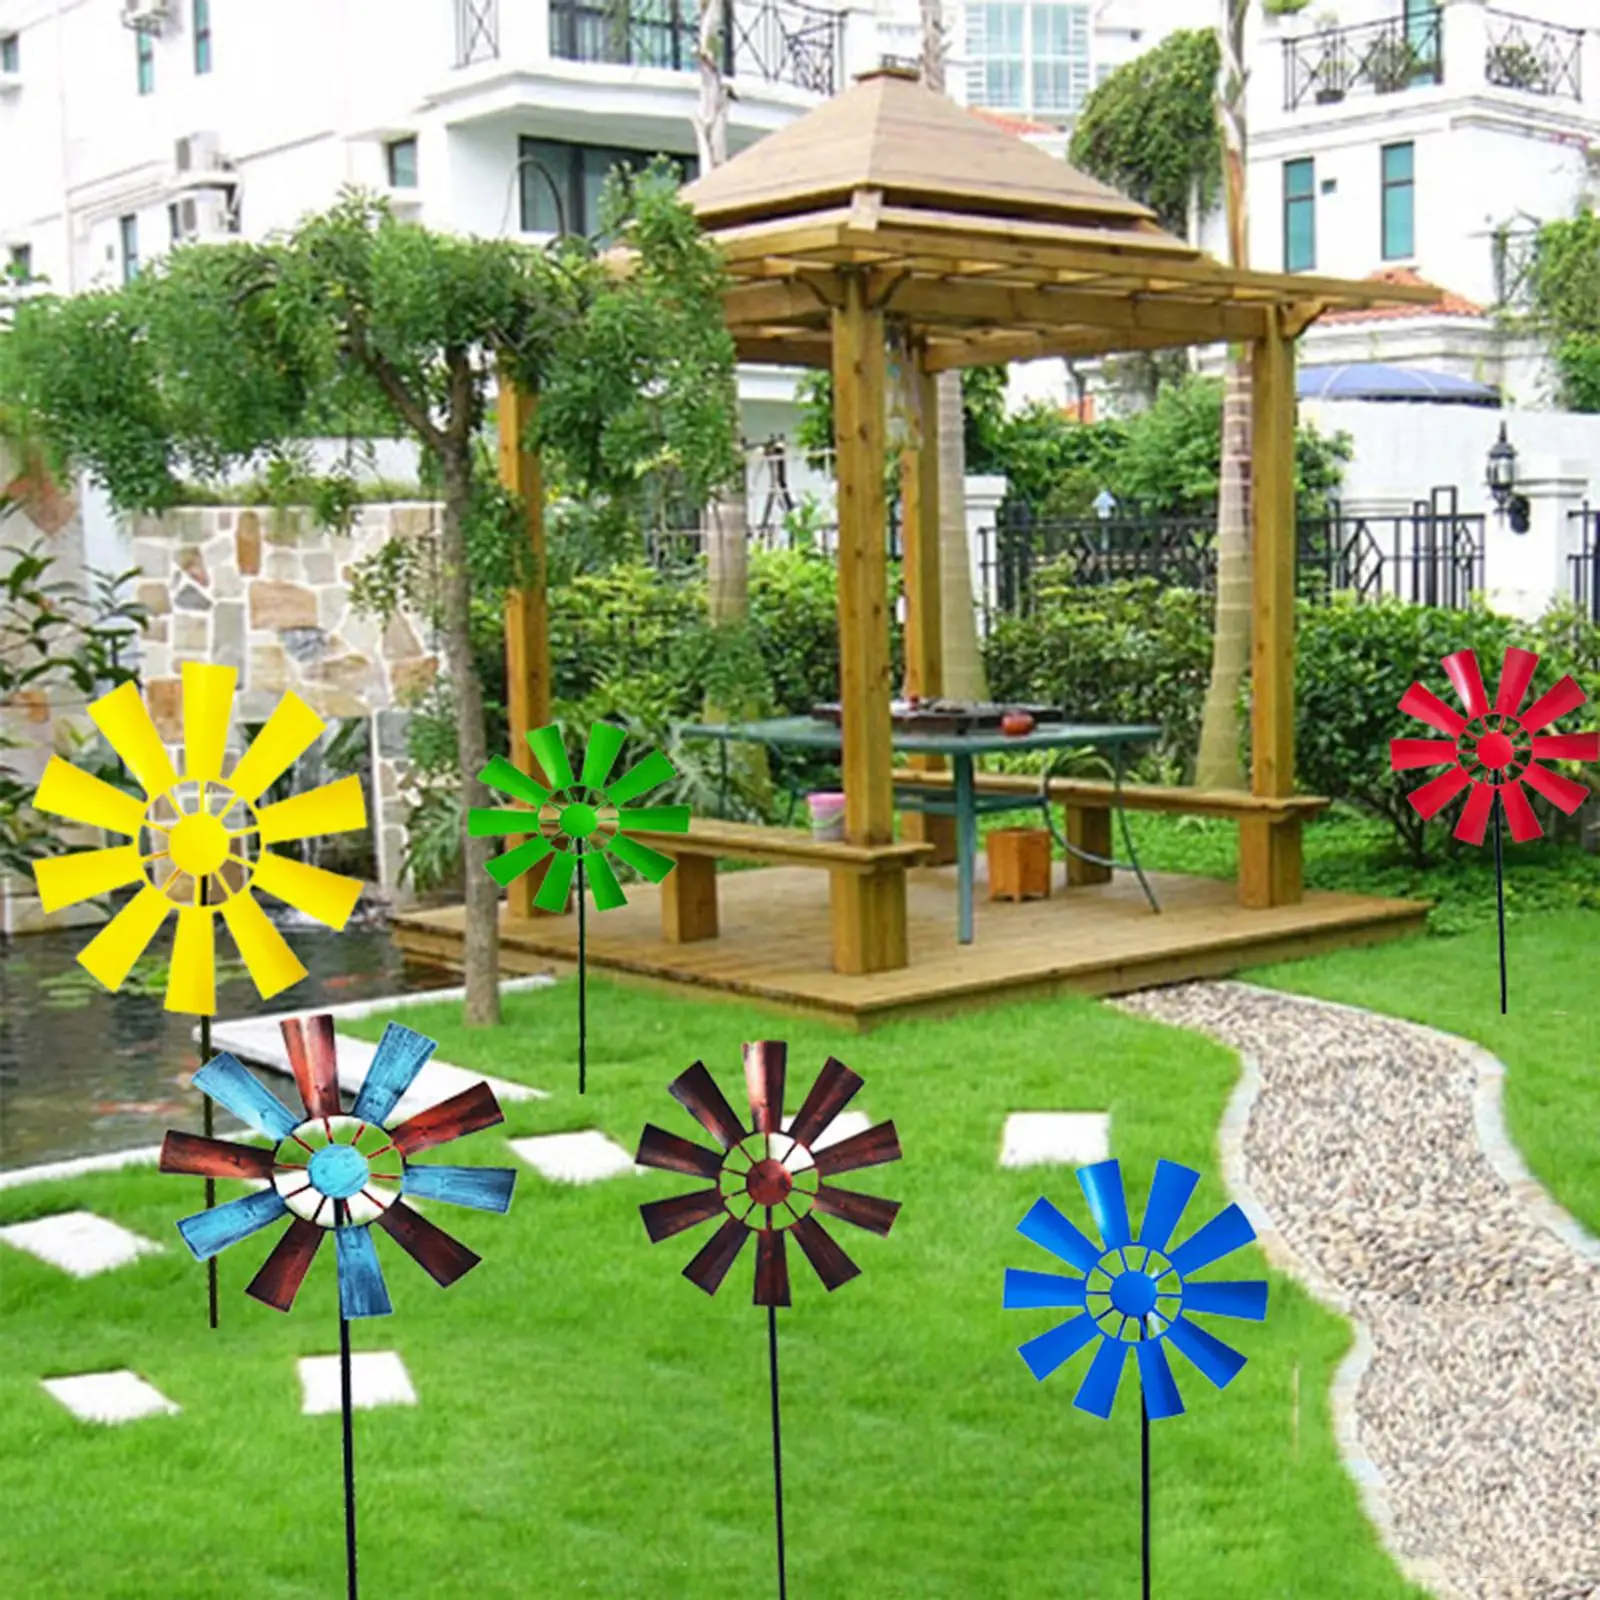 28in Windmill Decor Metal Rustic Ground Plug Wind Spinner Stake Rotating for Garden Backyard Lawn Terrace Courtyard